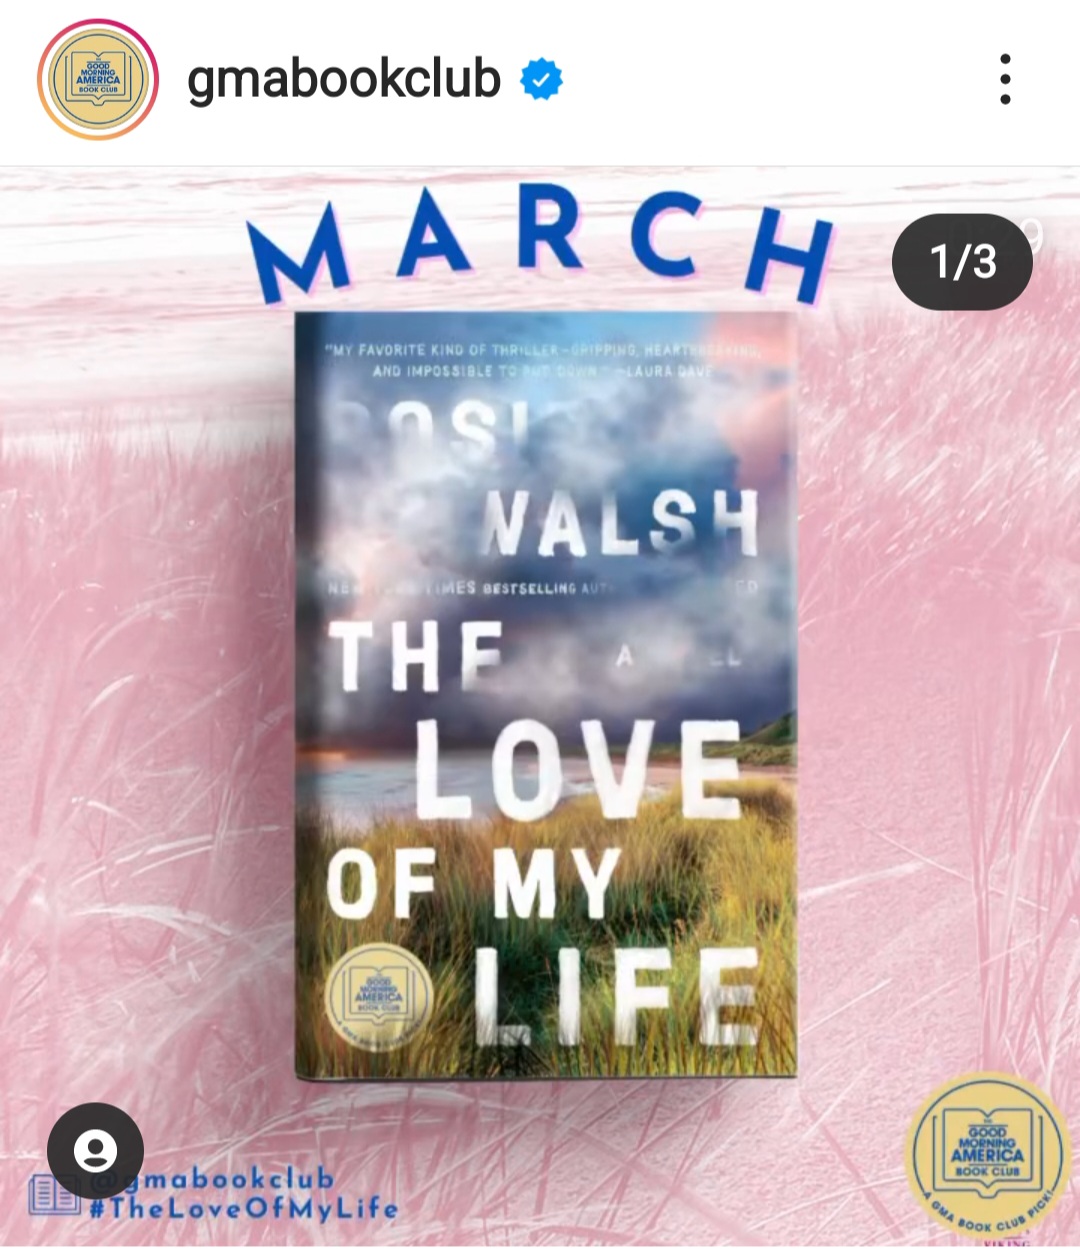 GMA (Good Morning America) Book Club pick for March 2022 and complete